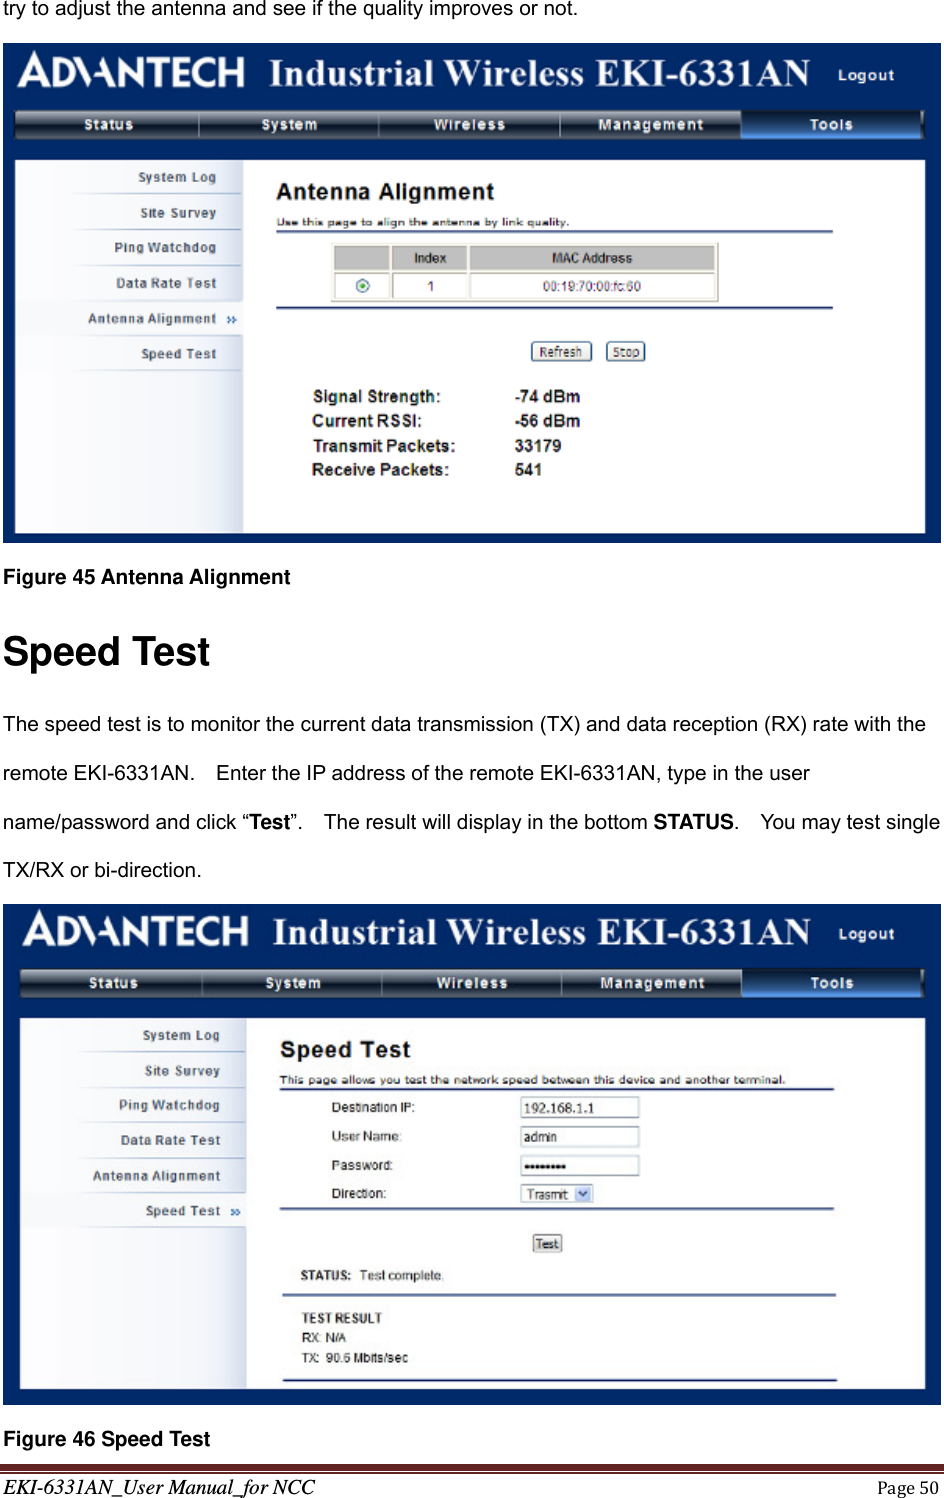 EKI-6331AN_User Manual_for NCCPage50try to adjust the antenna and see if the quality improves or not.  Figure 45 Antenna Alignment Speed Test The speed test is to monitor the current data transmission (TX) and data reception (RX) rate with the remote EKI-6331AN.    Enter the IP address of the remote EKI-6331AN, type in the user name/password and click “Test”.    The result will display in the bottom STATUS.    You may test single TX/RX or bi-direction.  Figure 46 Speed Test 